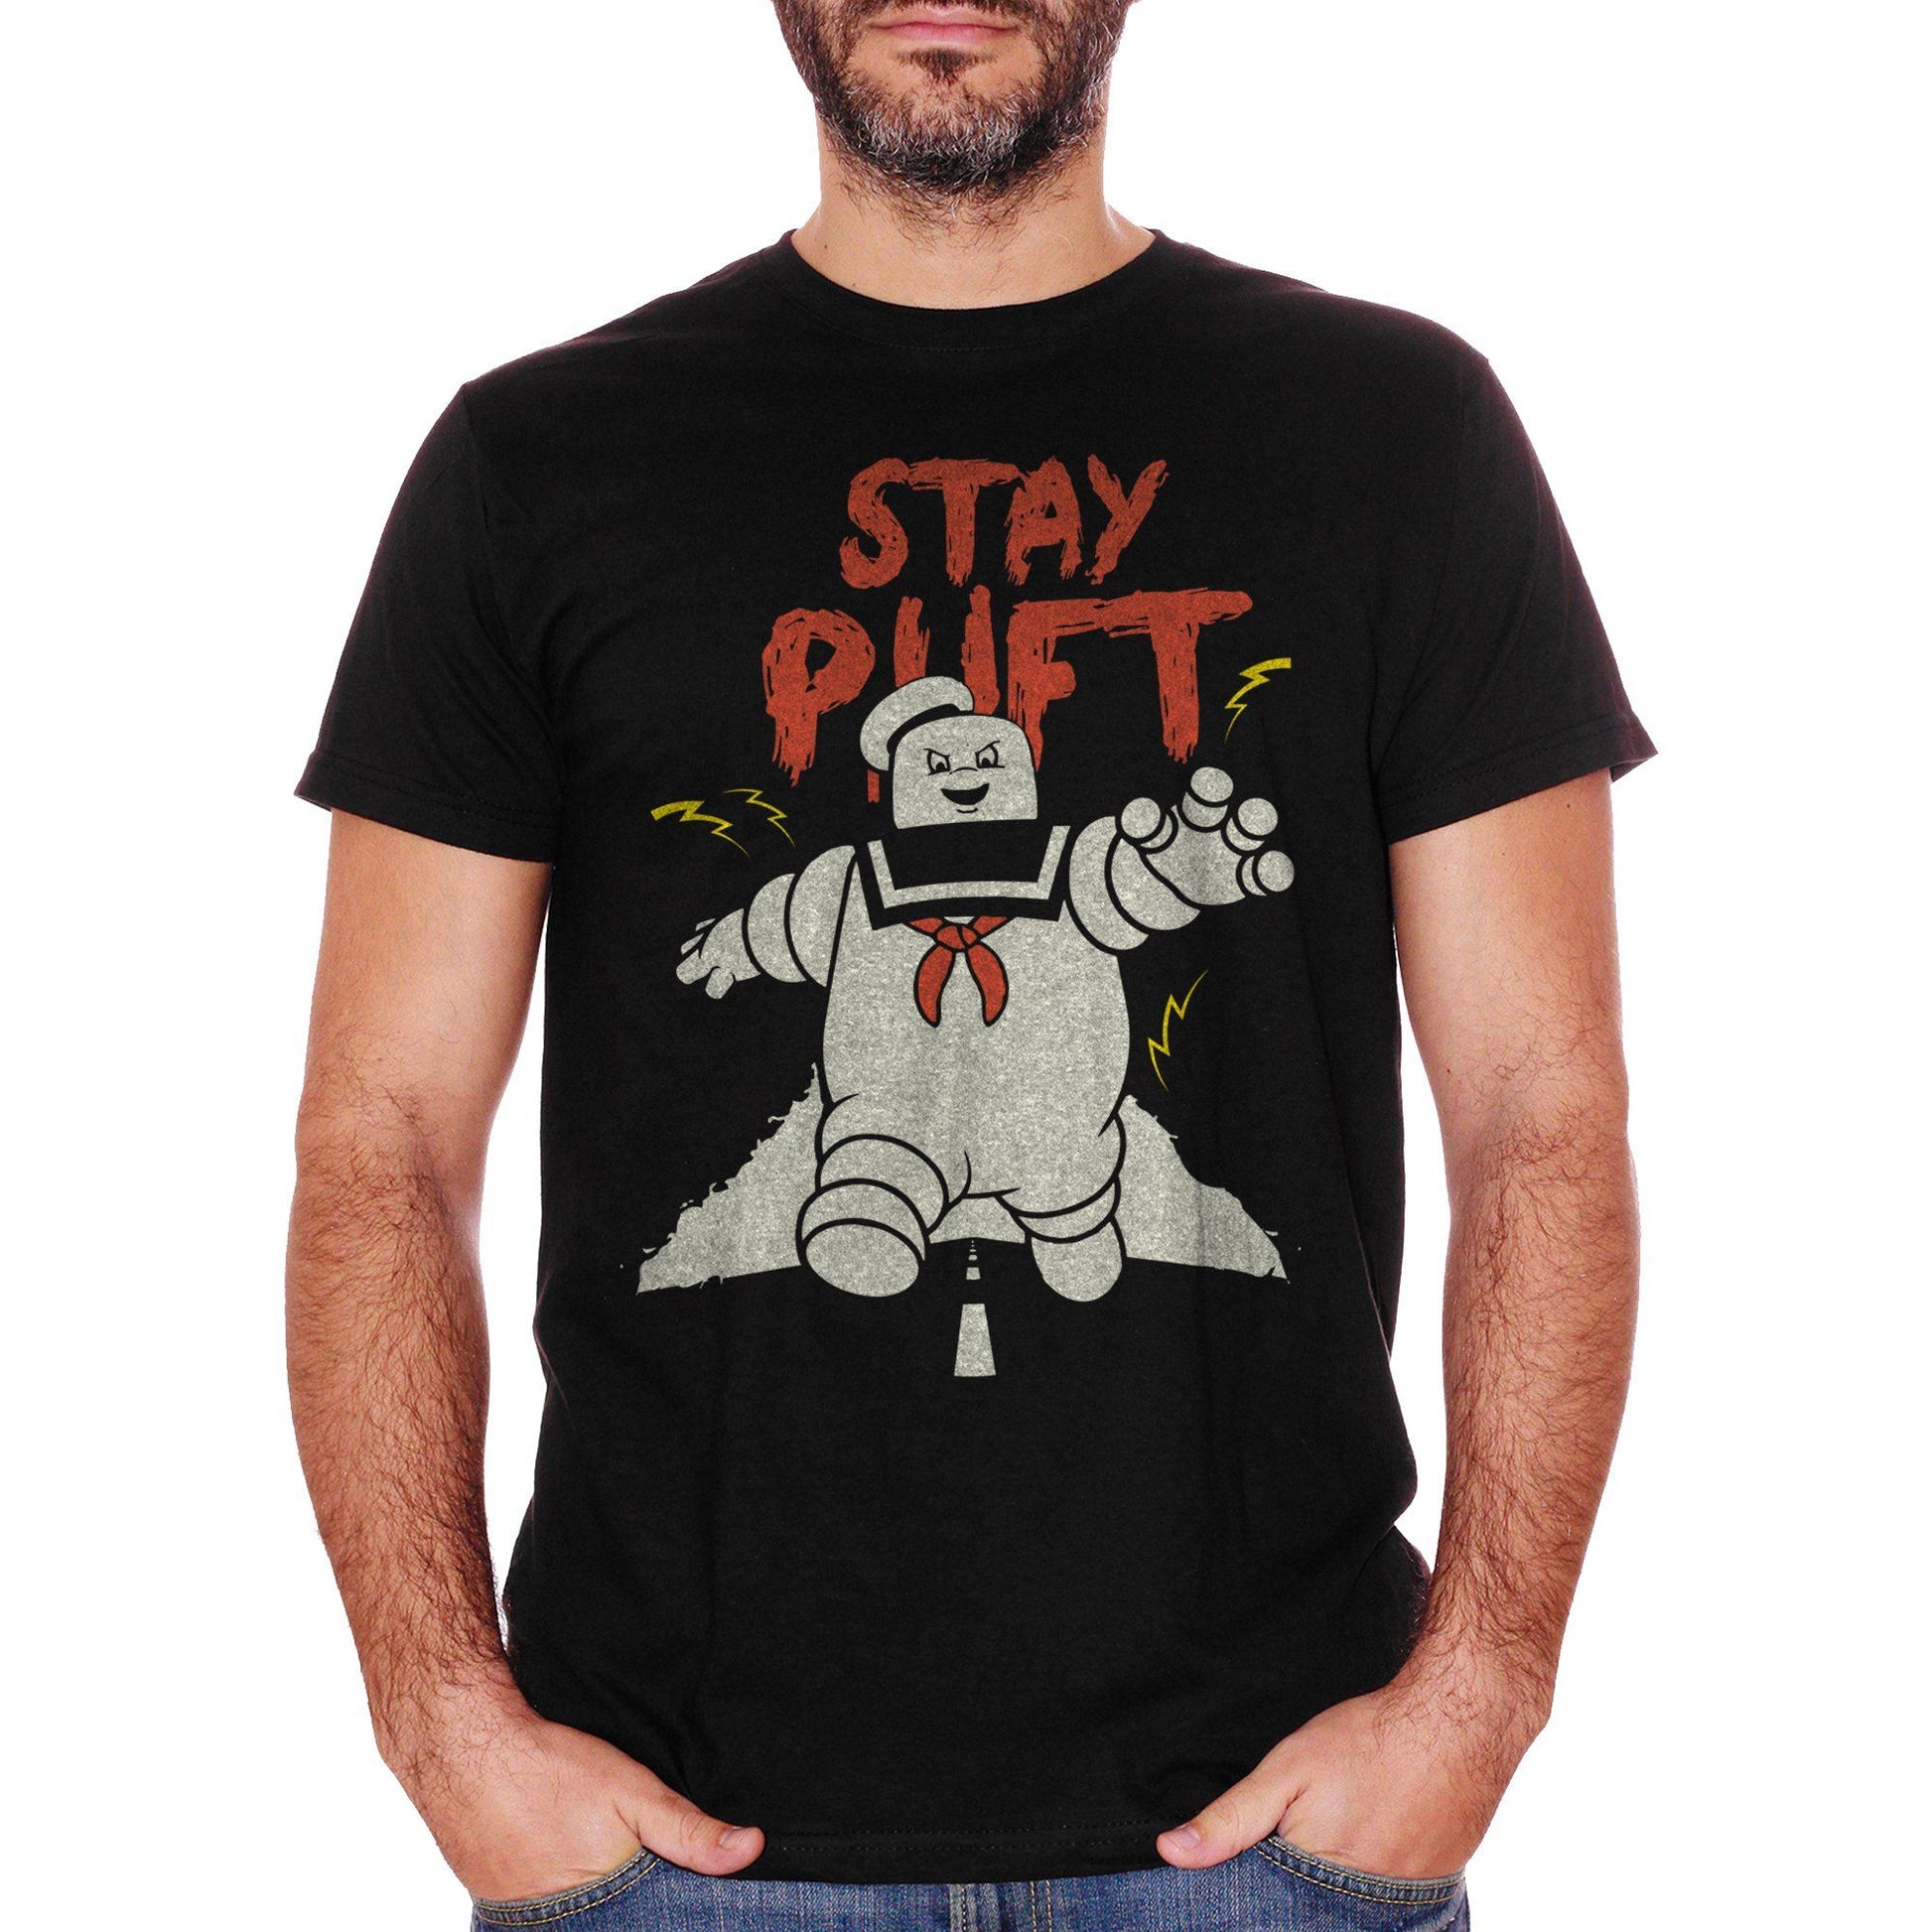 White T-Shirt Stay Puft - Marshmallow Man Ghostbusters - FILM Choose ur color CucShop